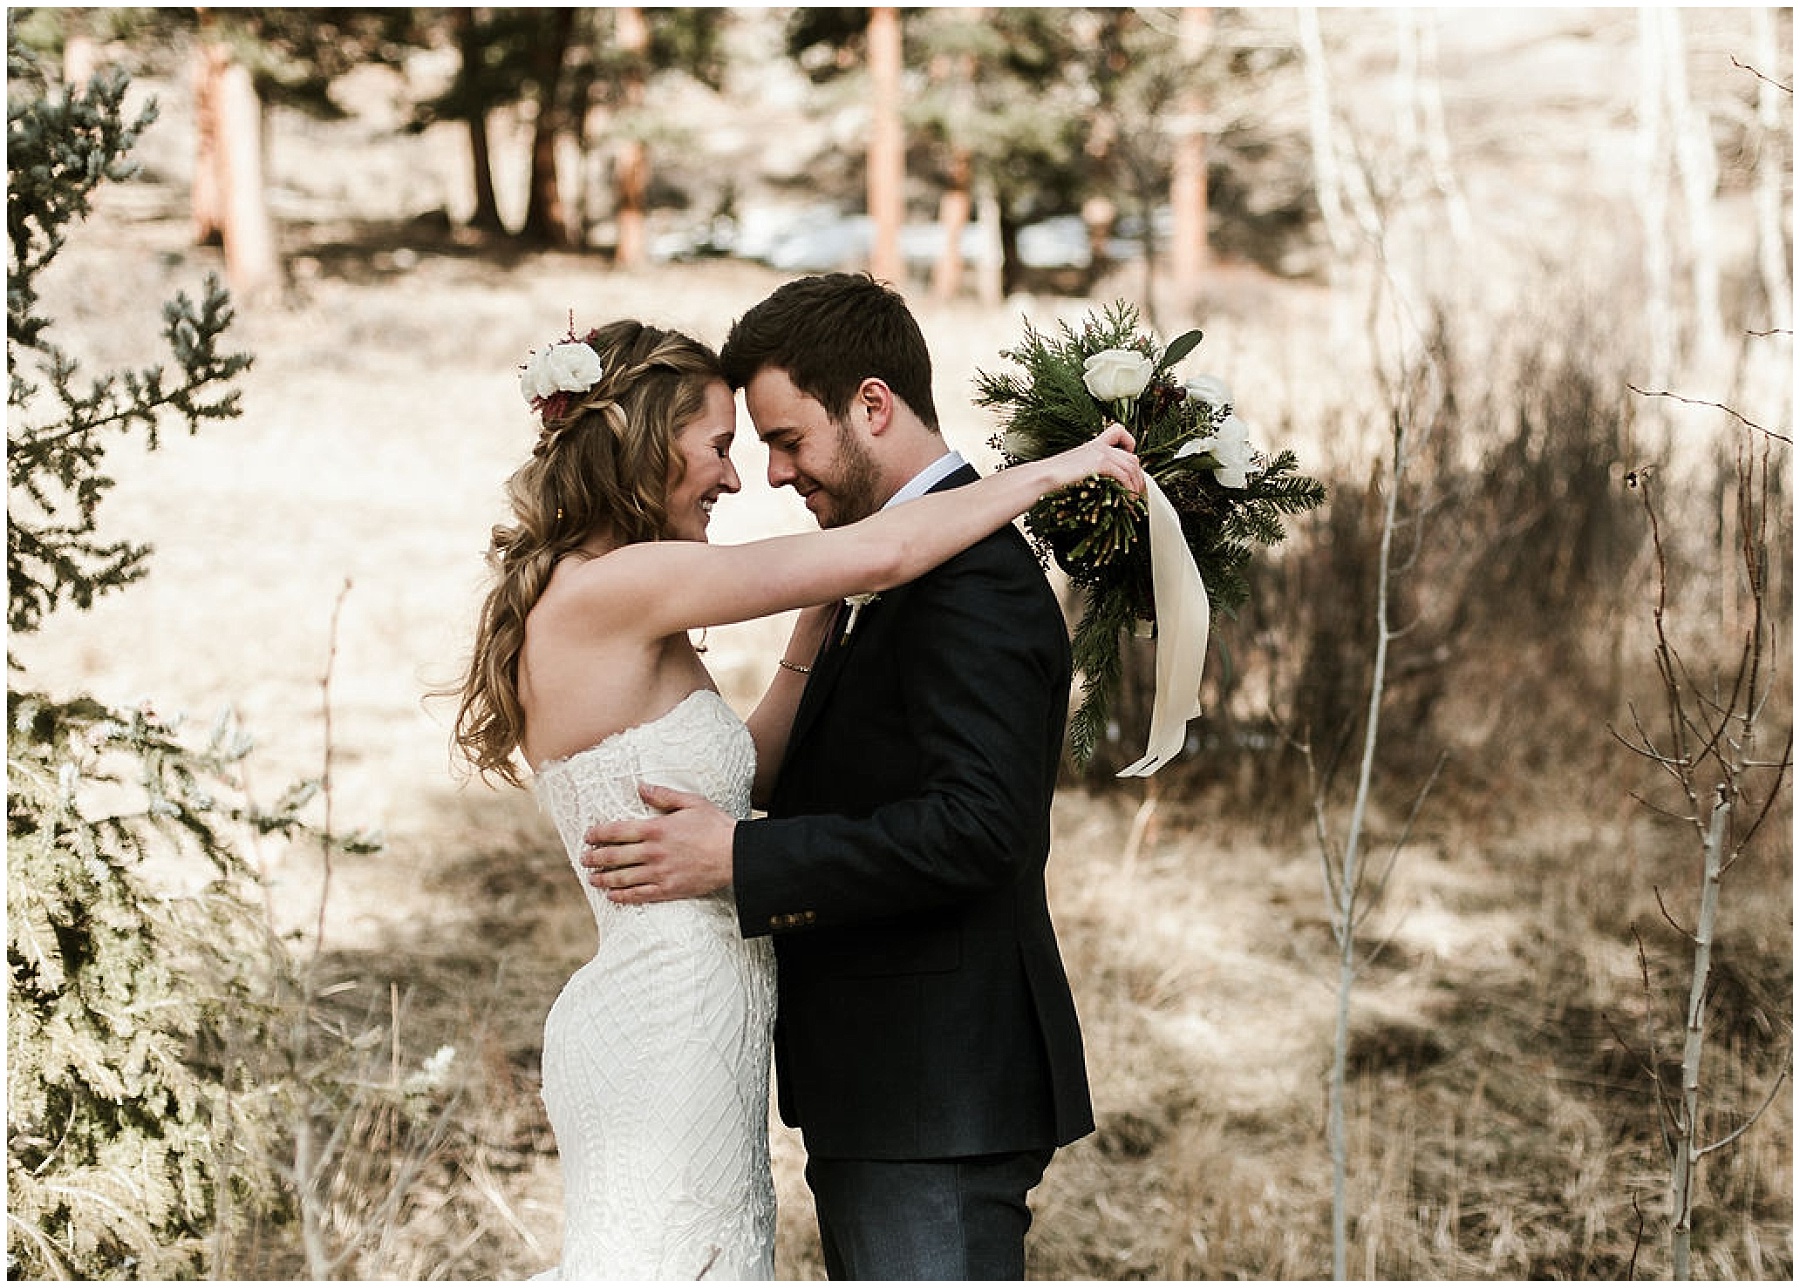 Katesalleyphotography-107_Haley and Dan get married in Estes Park.jpg